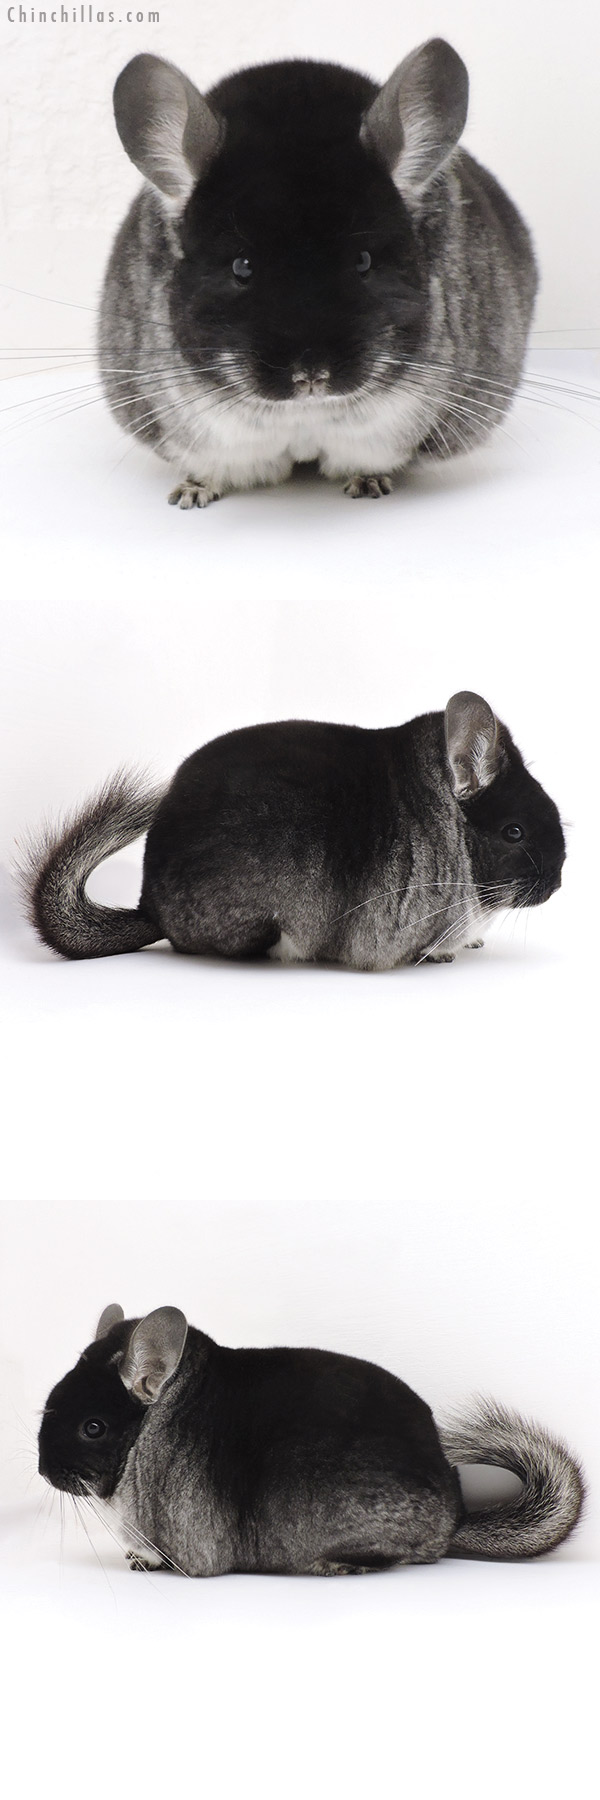 Chinchilla or related item offered for sale or export on Chinchillas.com - 17365 Large Blocky Premium Production Quality Black Velvet Female Chinchilla